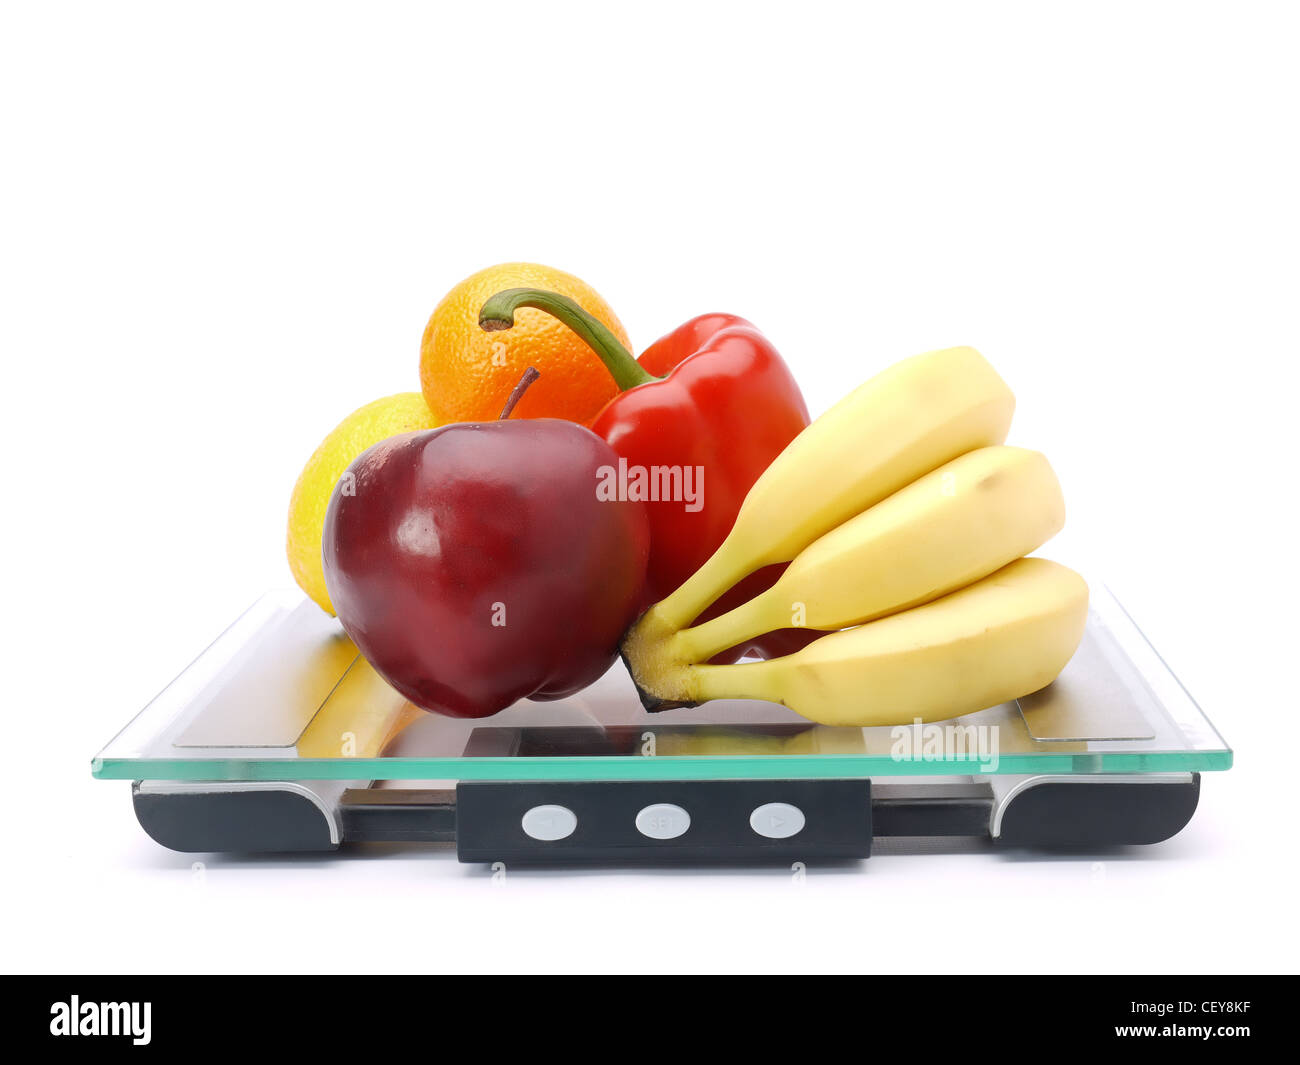 Bunch of fresh fruits and vegetables on glass bathroom scales shot on white Stock Photo